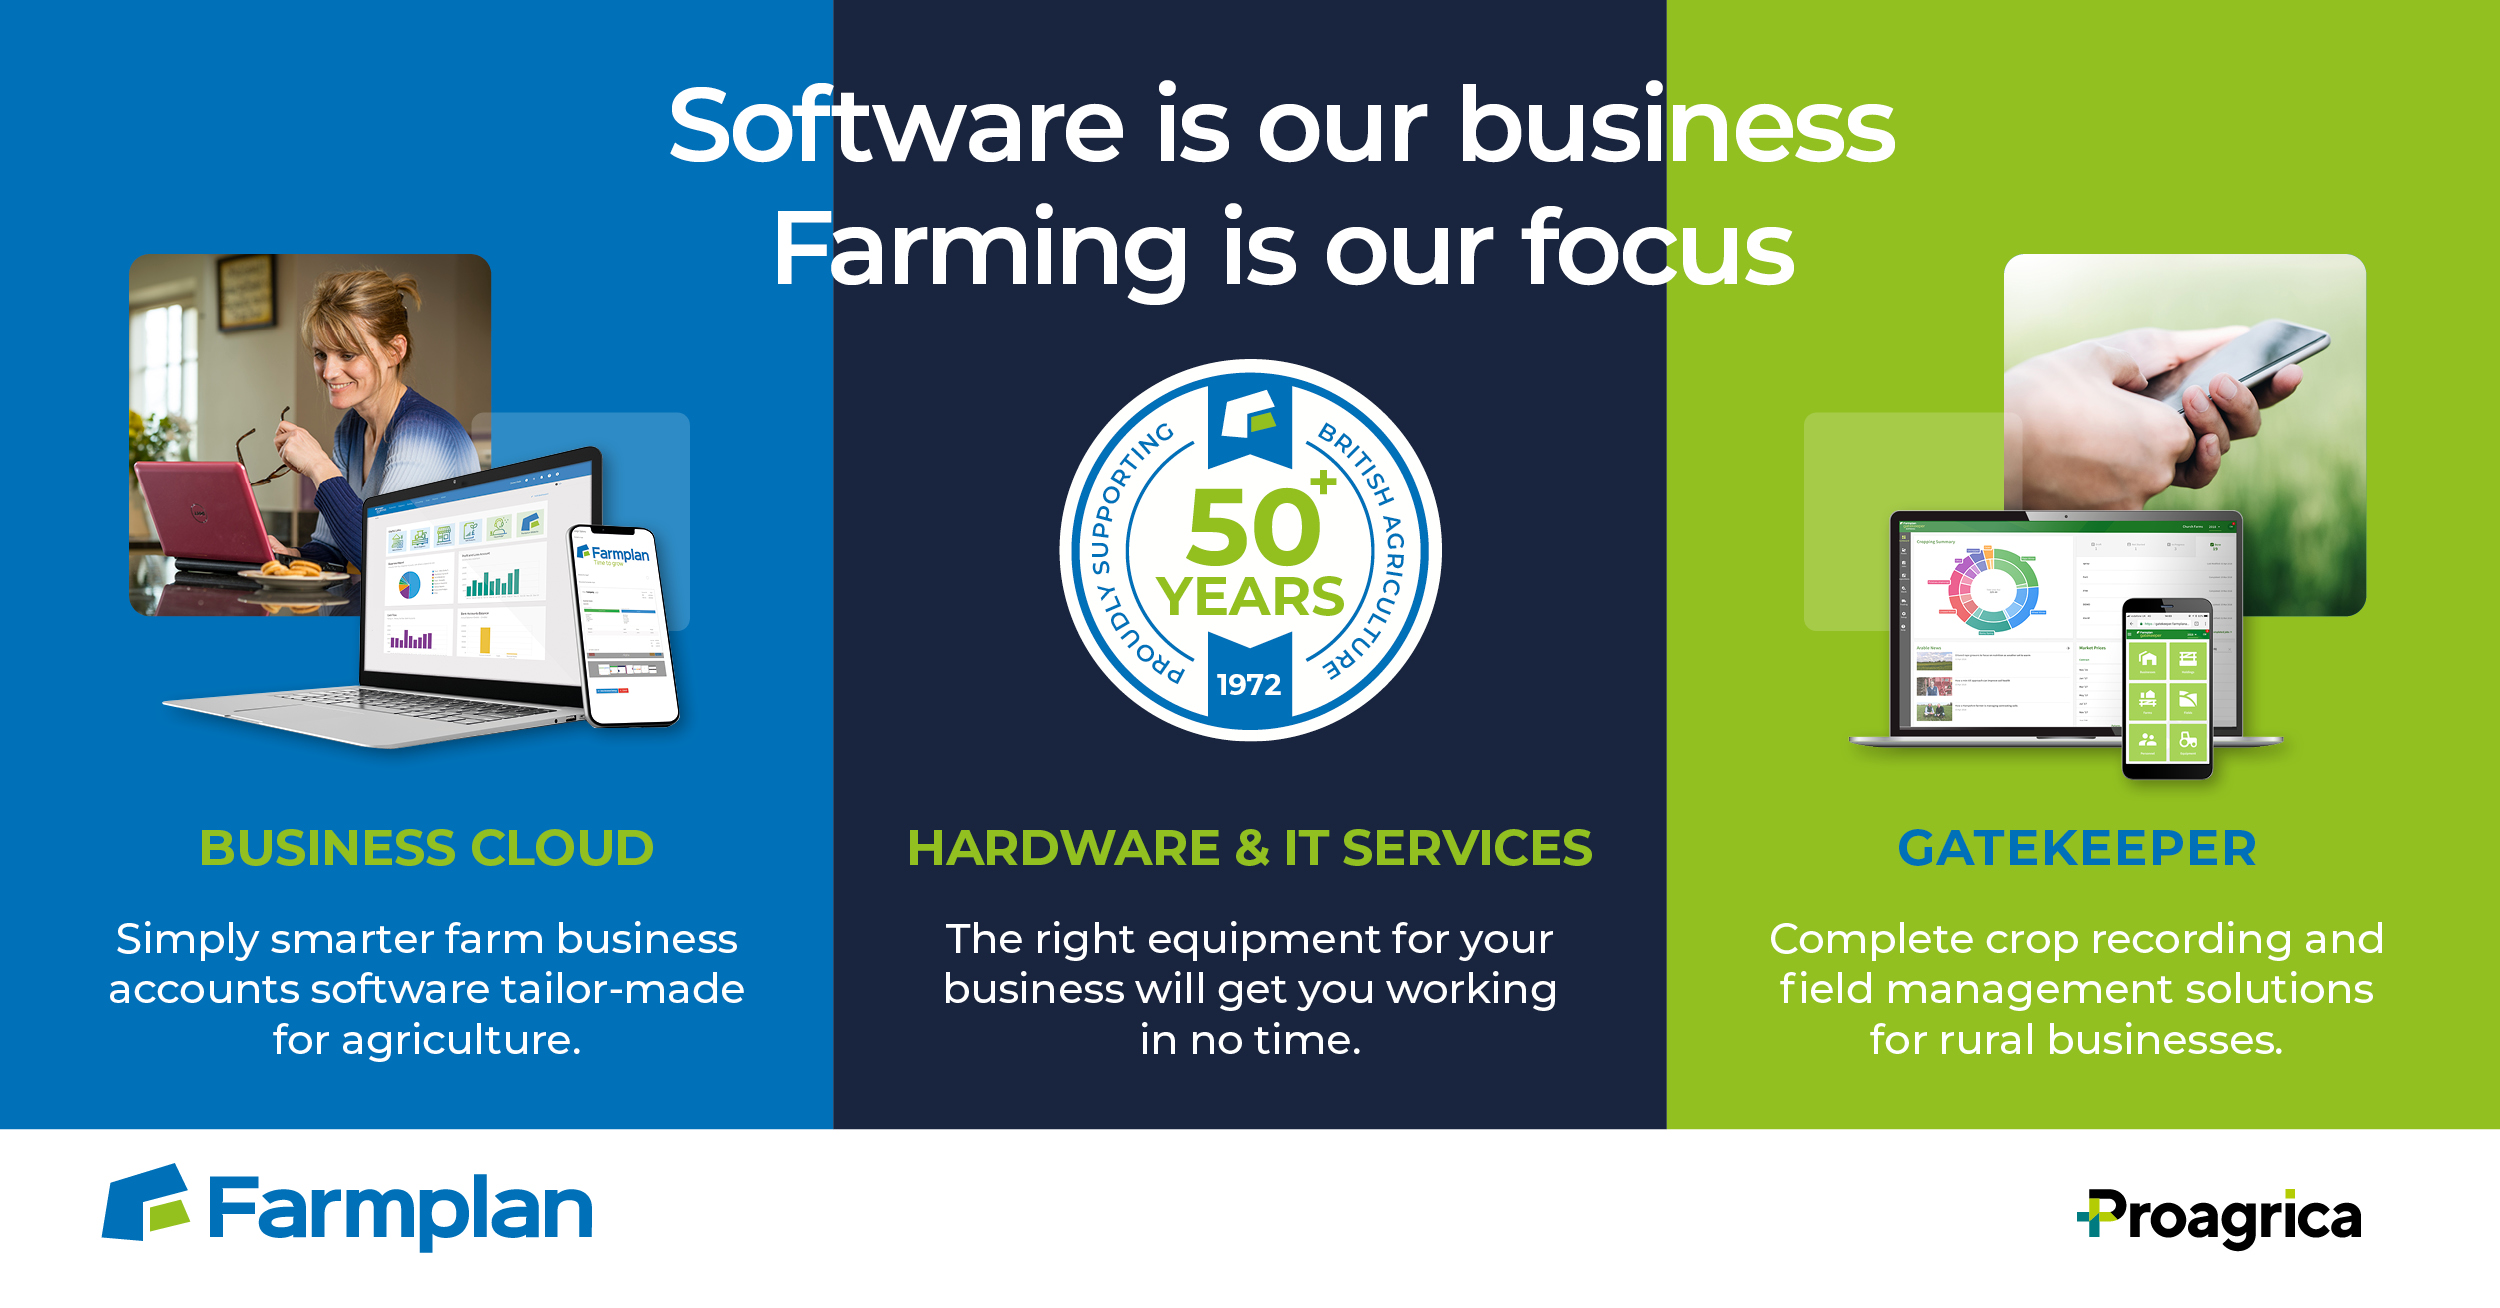 Software is our business, Farming is our focus.